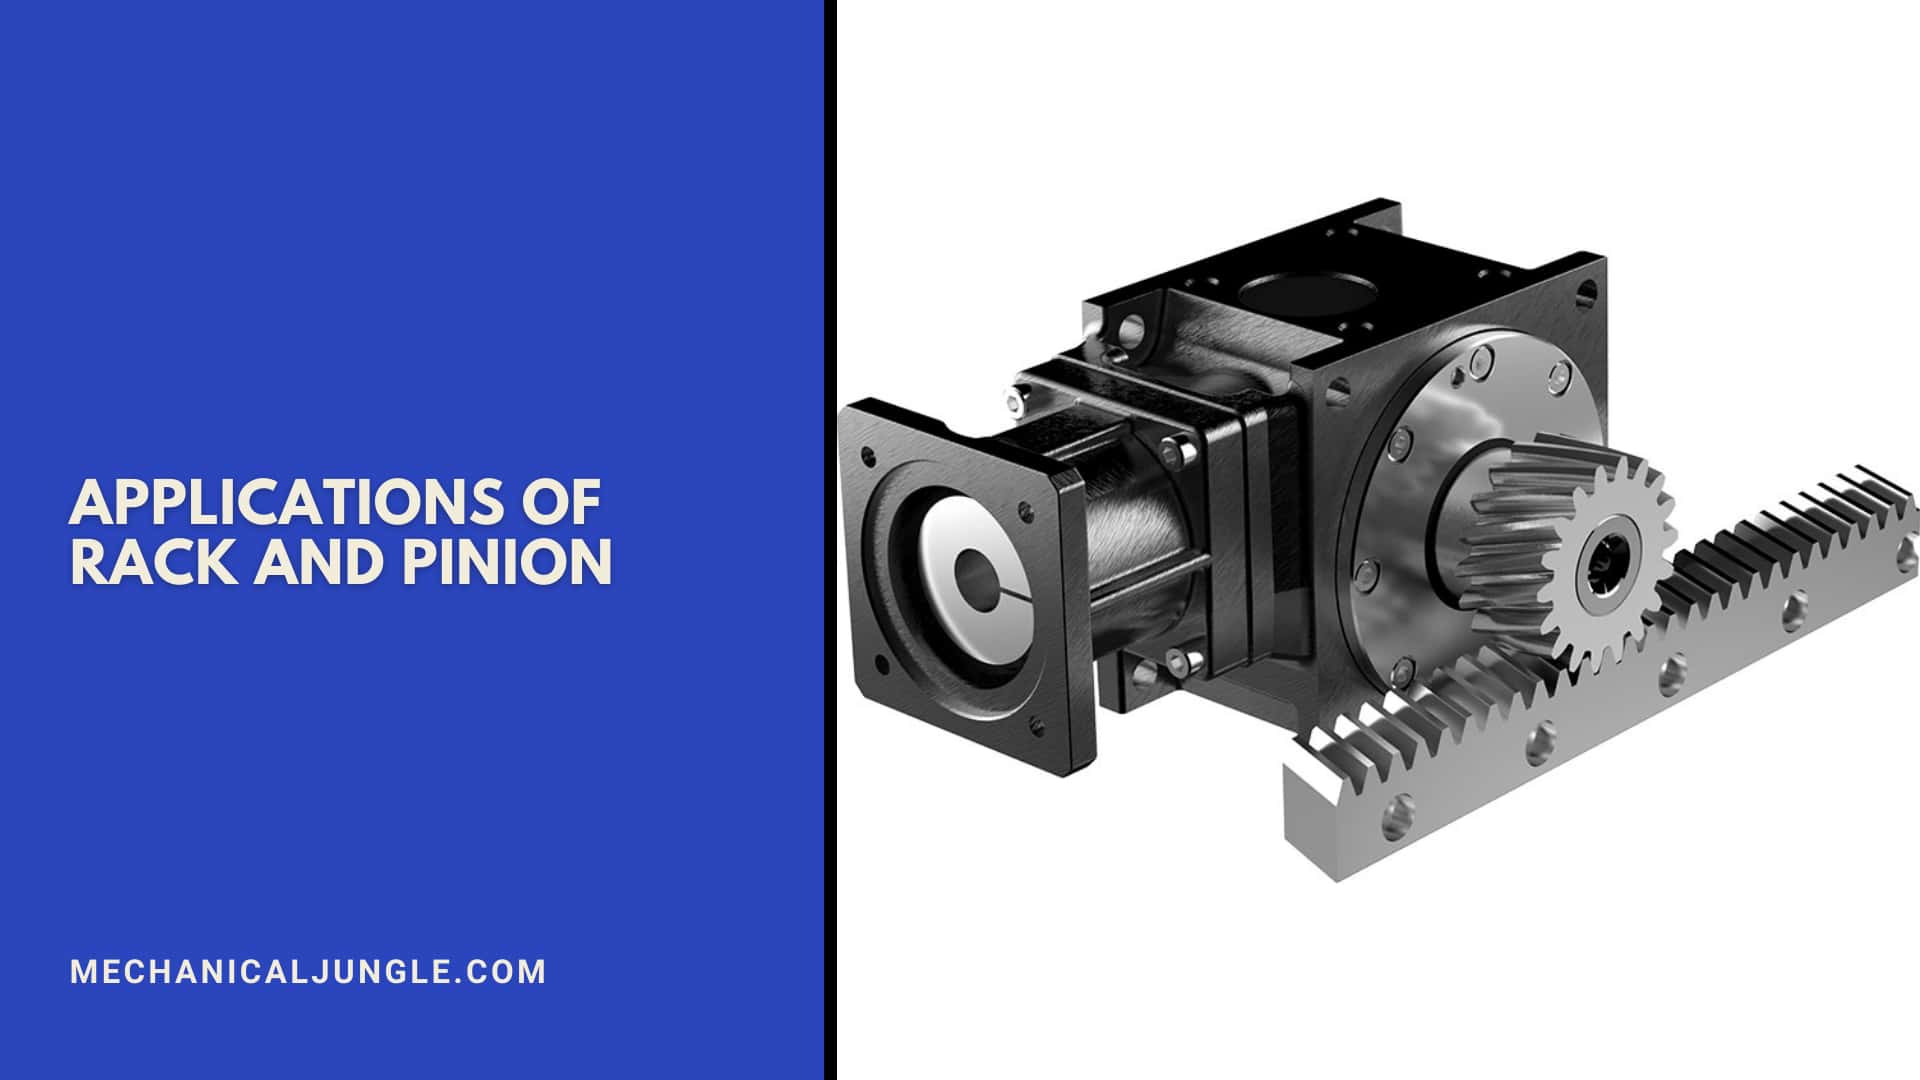 Applications of Rack and Pinion